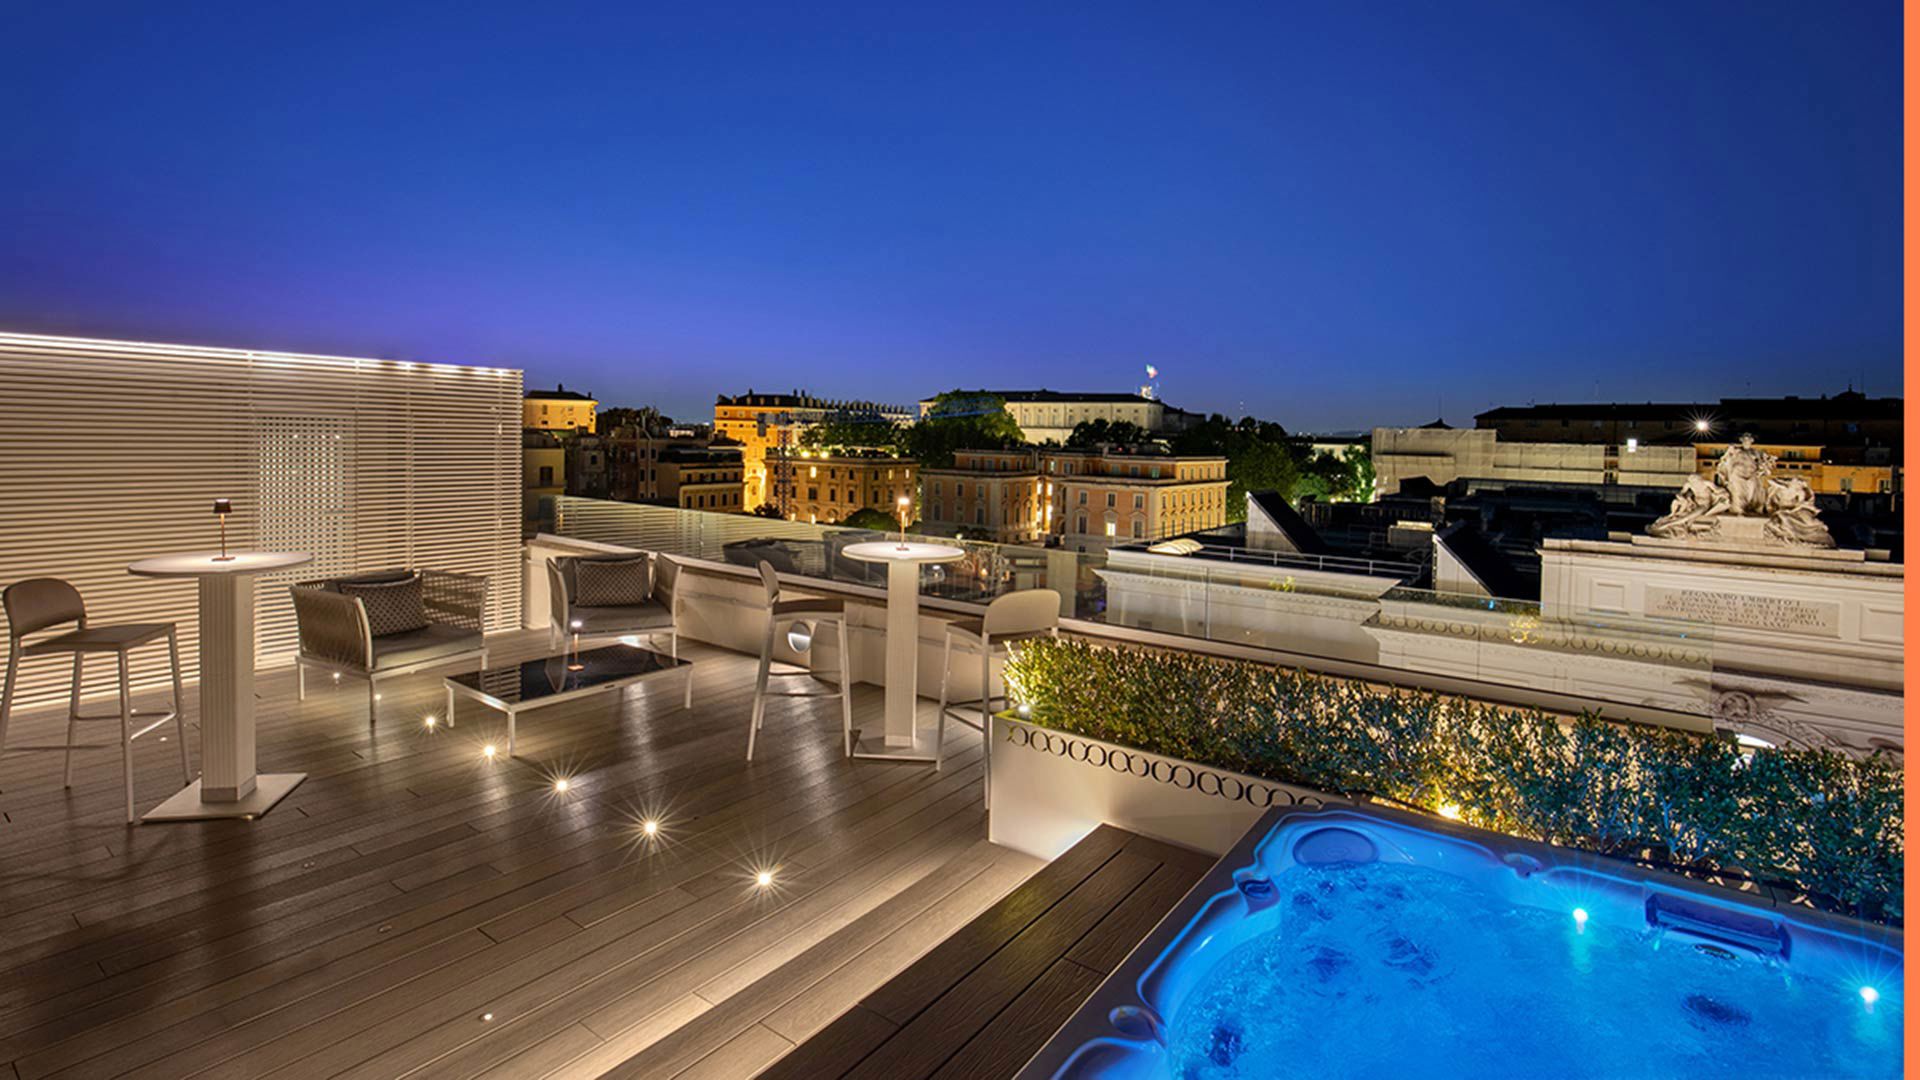 PRIVATE JACUZZI ROOFTOP